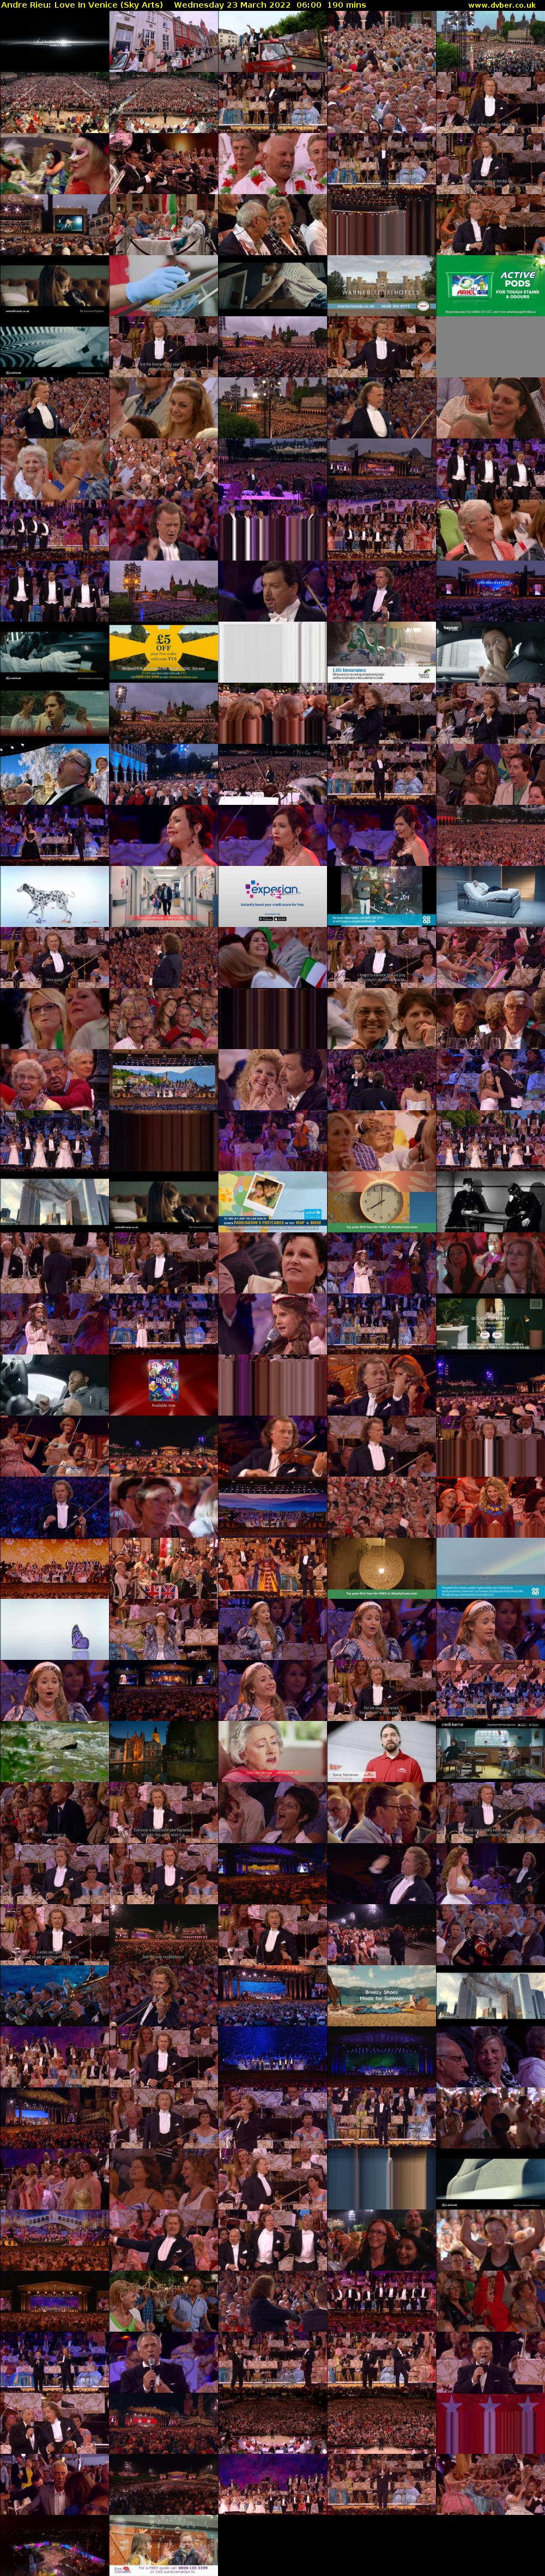 Andre Rieu: Love In Venice (Sky Arts) Wednesday 23 March 2022 06:00 - 09:10